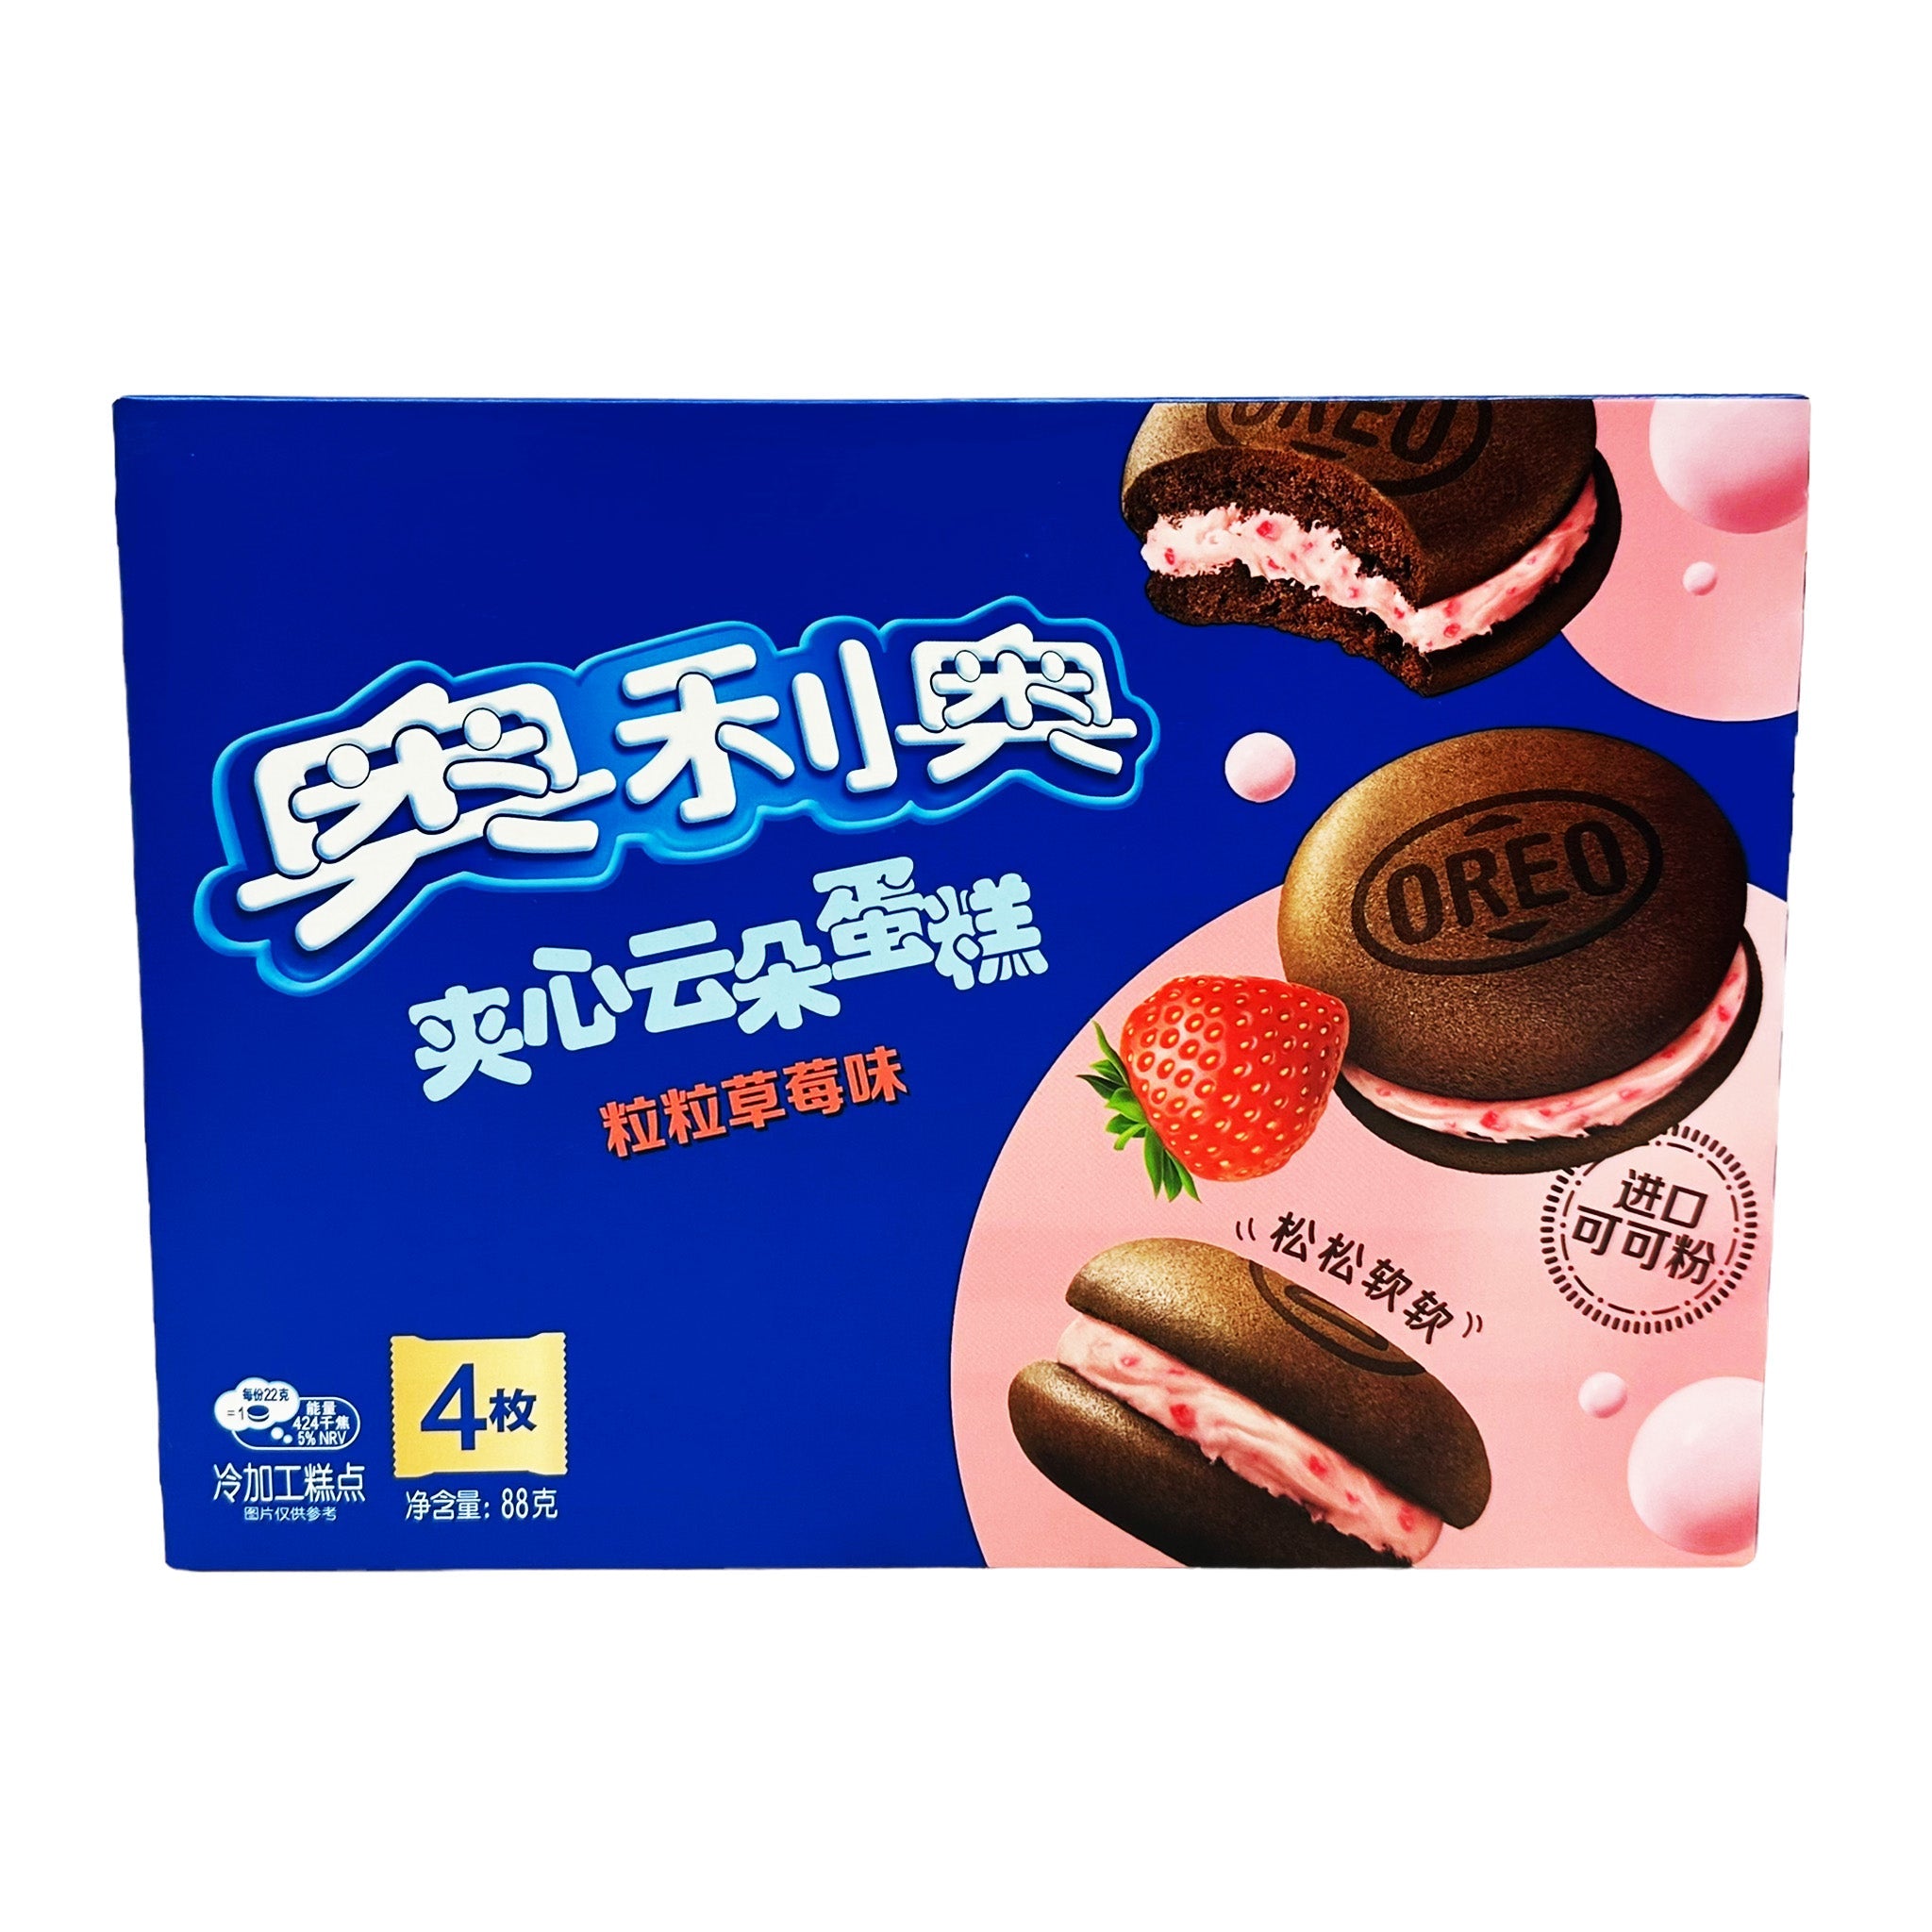 Oreo Strawberry Pudding Cakes - Taiwan (16 Count)